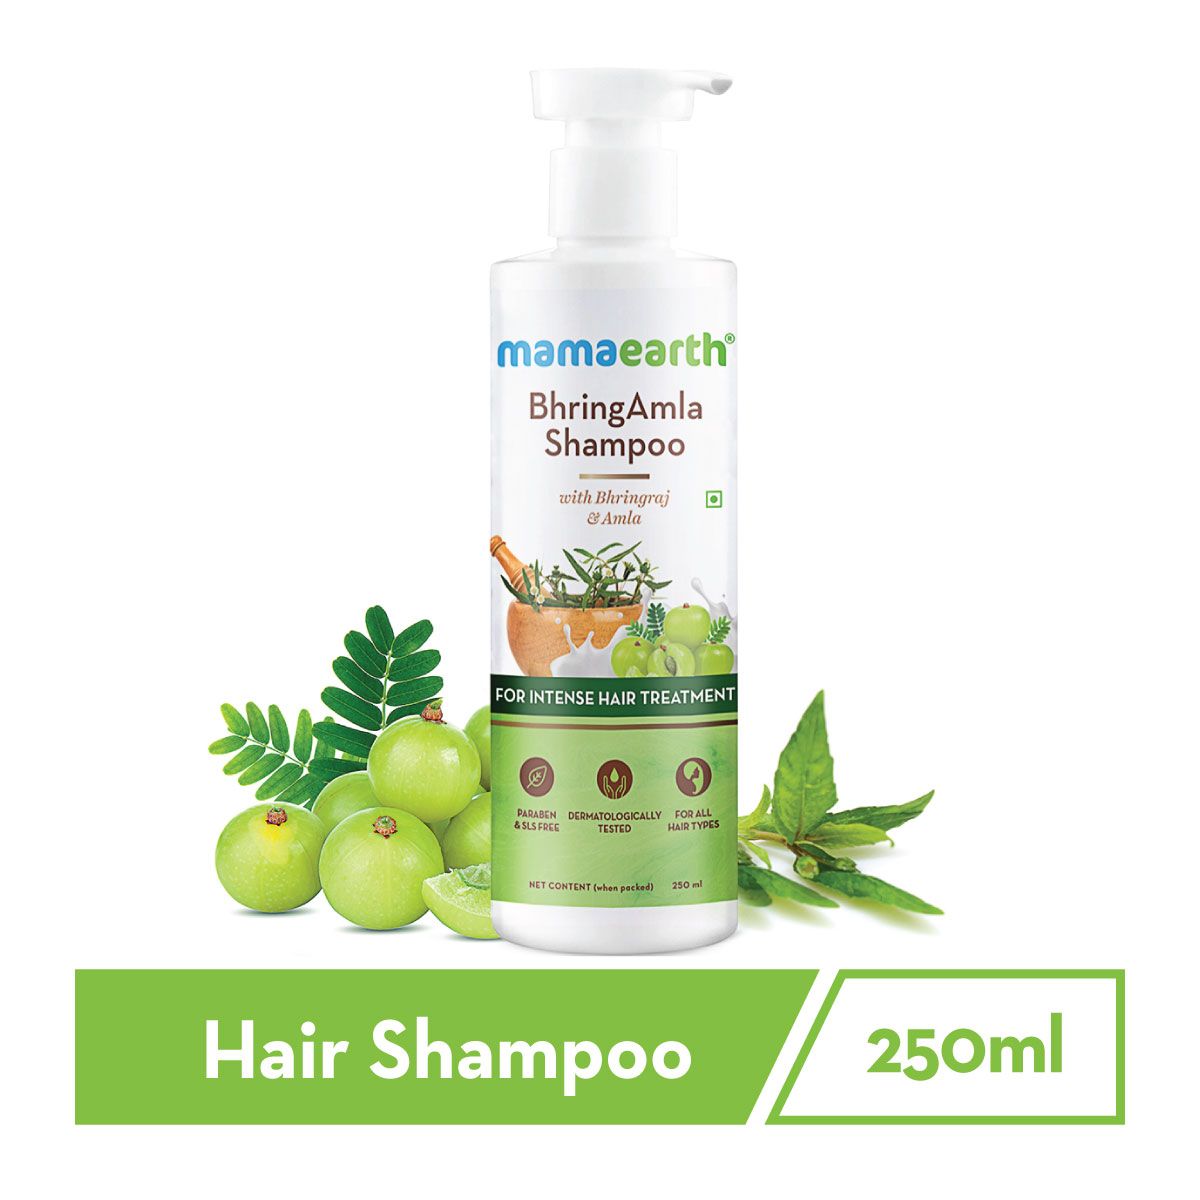 Mamaearth BhringAmla Shampoo Better Than Others Available In The Market